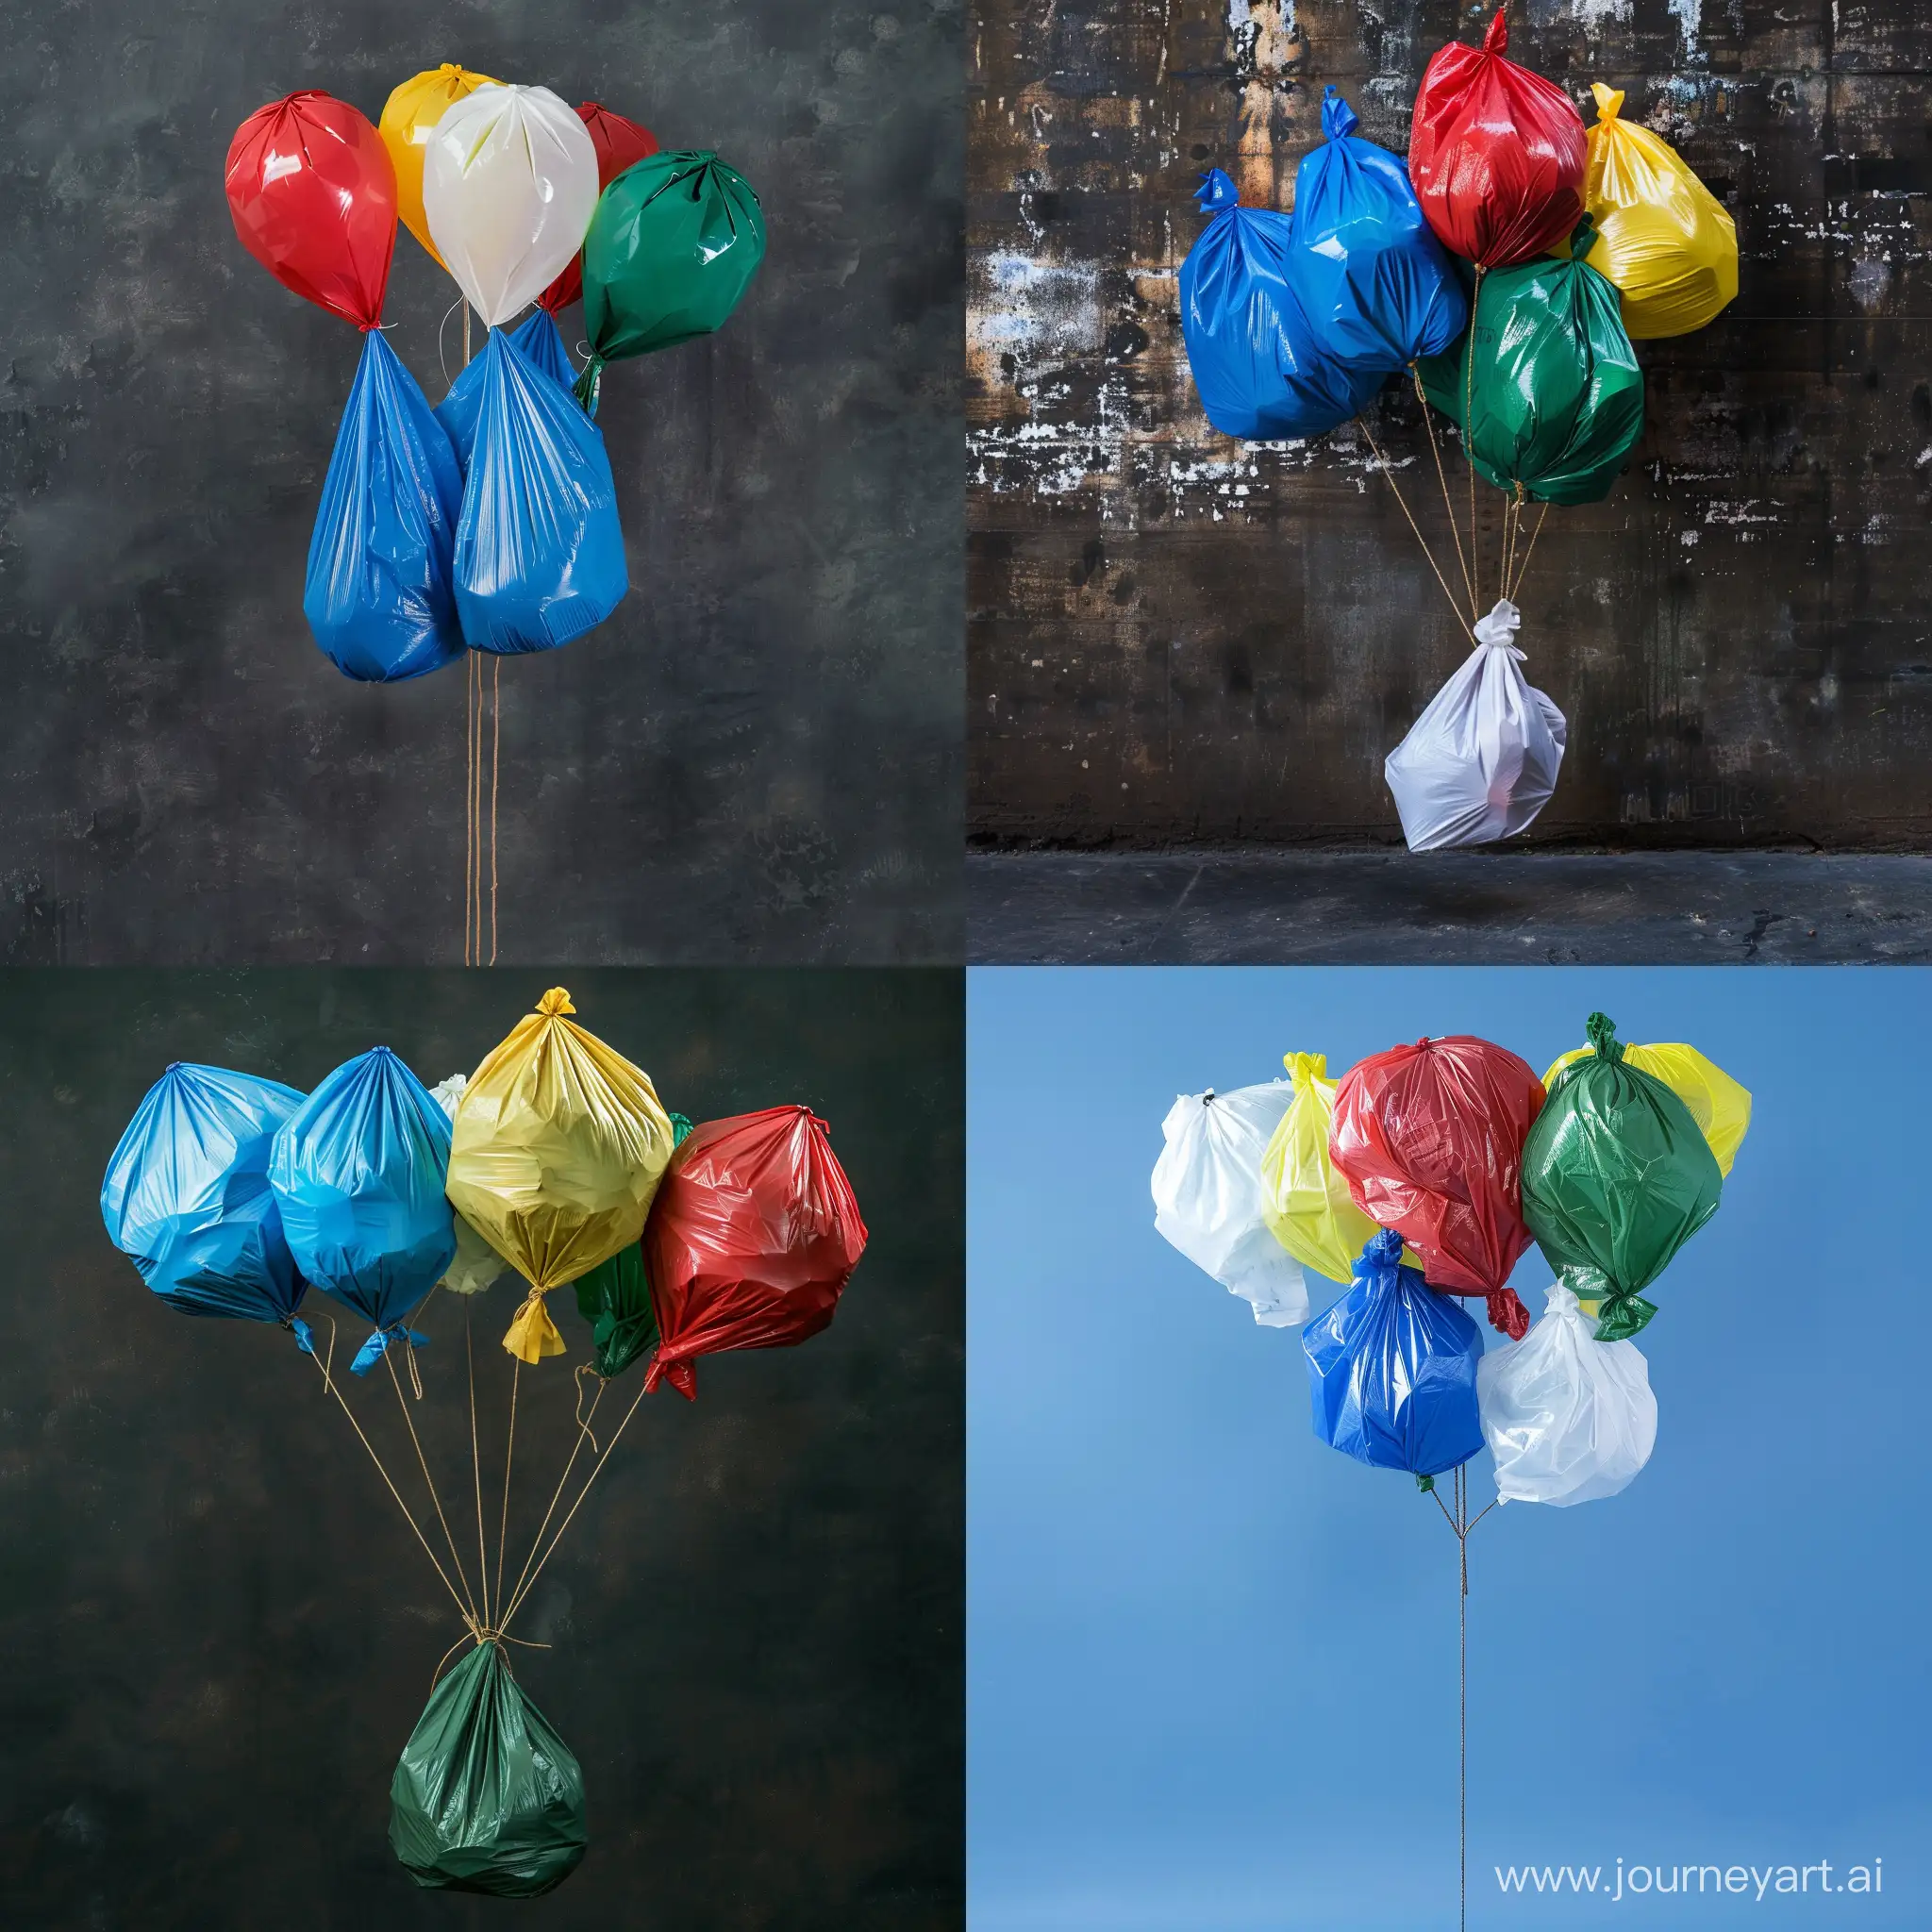 Colorful-Trash-Bag-Balloons-Suspended-by-a-Rope